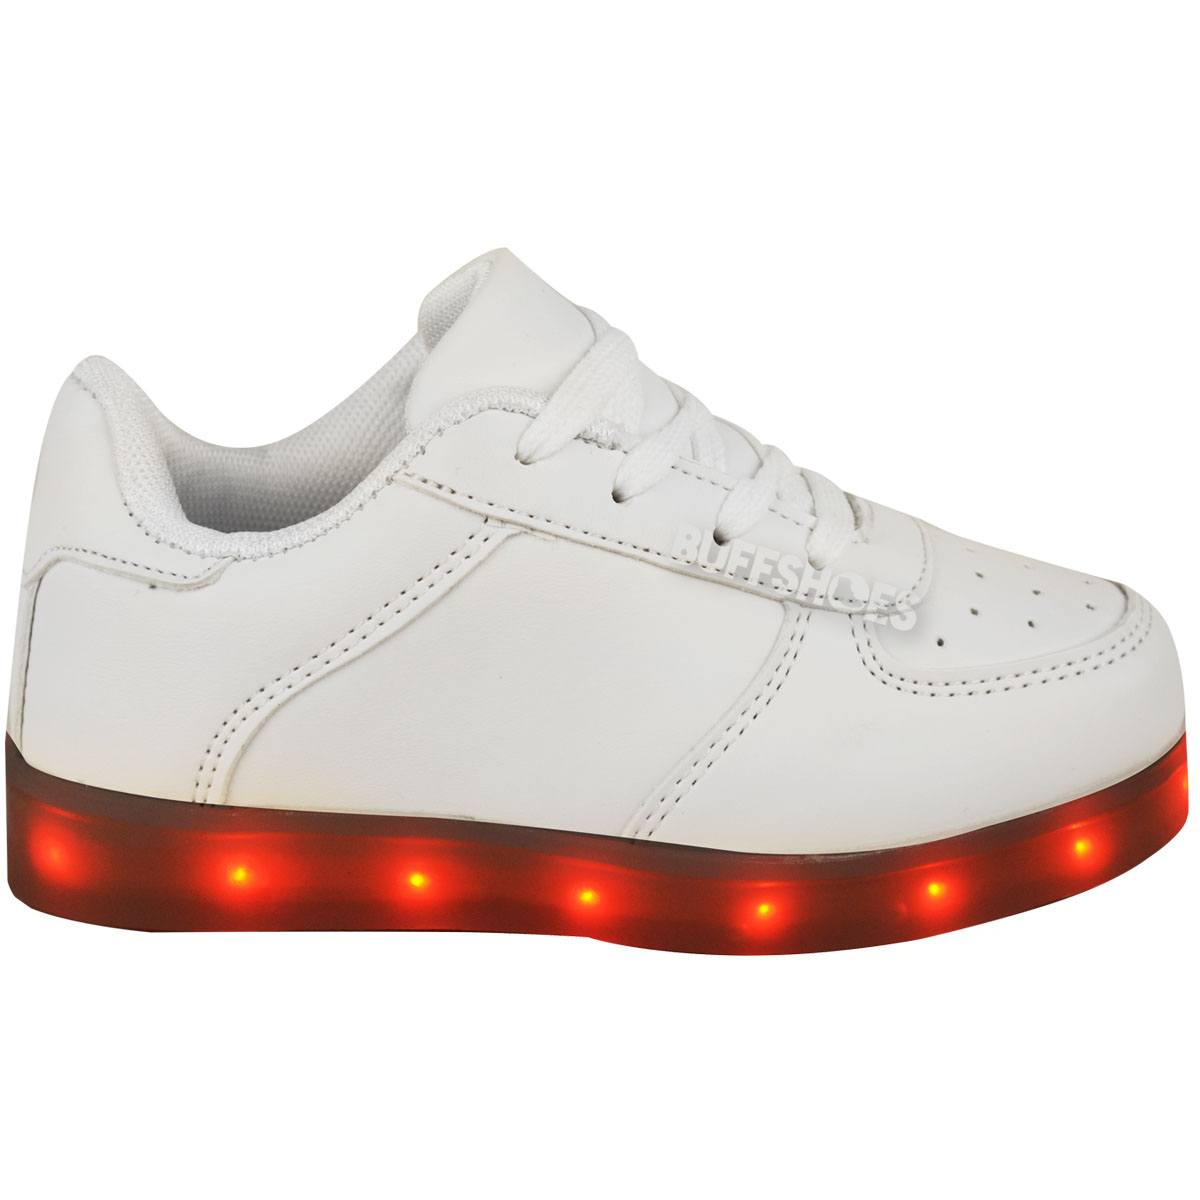 childrens trainers with flashing lights uk